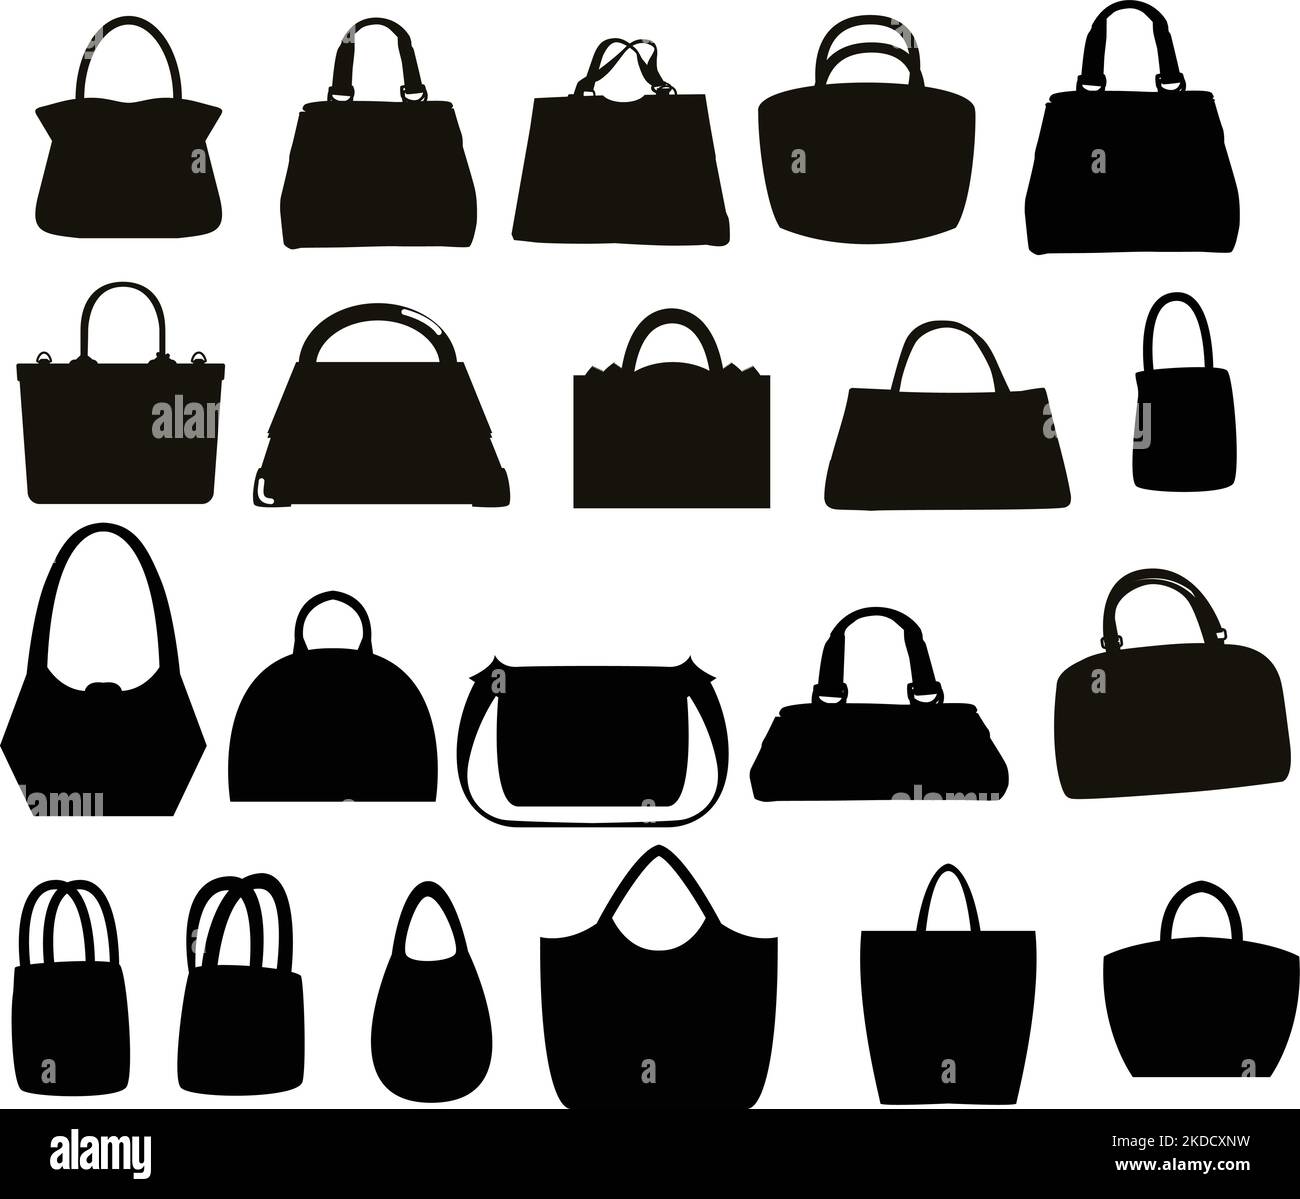 A set of silhouette clip art of different purses Stock Vector